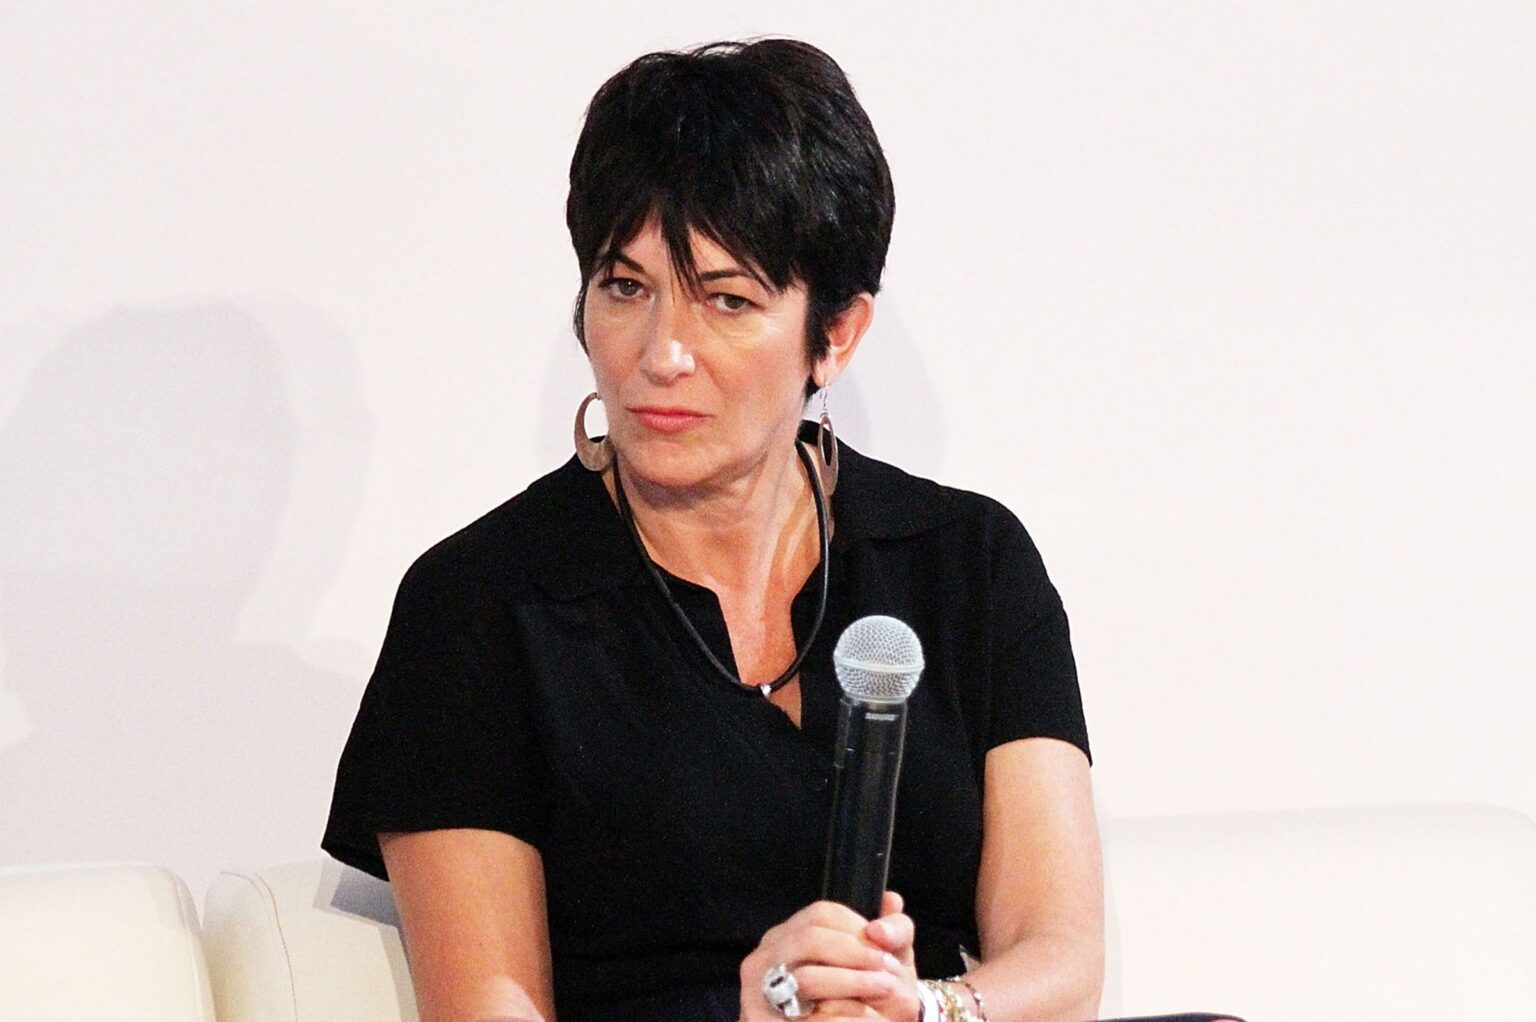 Since many believe Jeffrey Epstein was killed in prison, a lot of people are concerned as to whether Ghislaine Maxwell will see her trial.